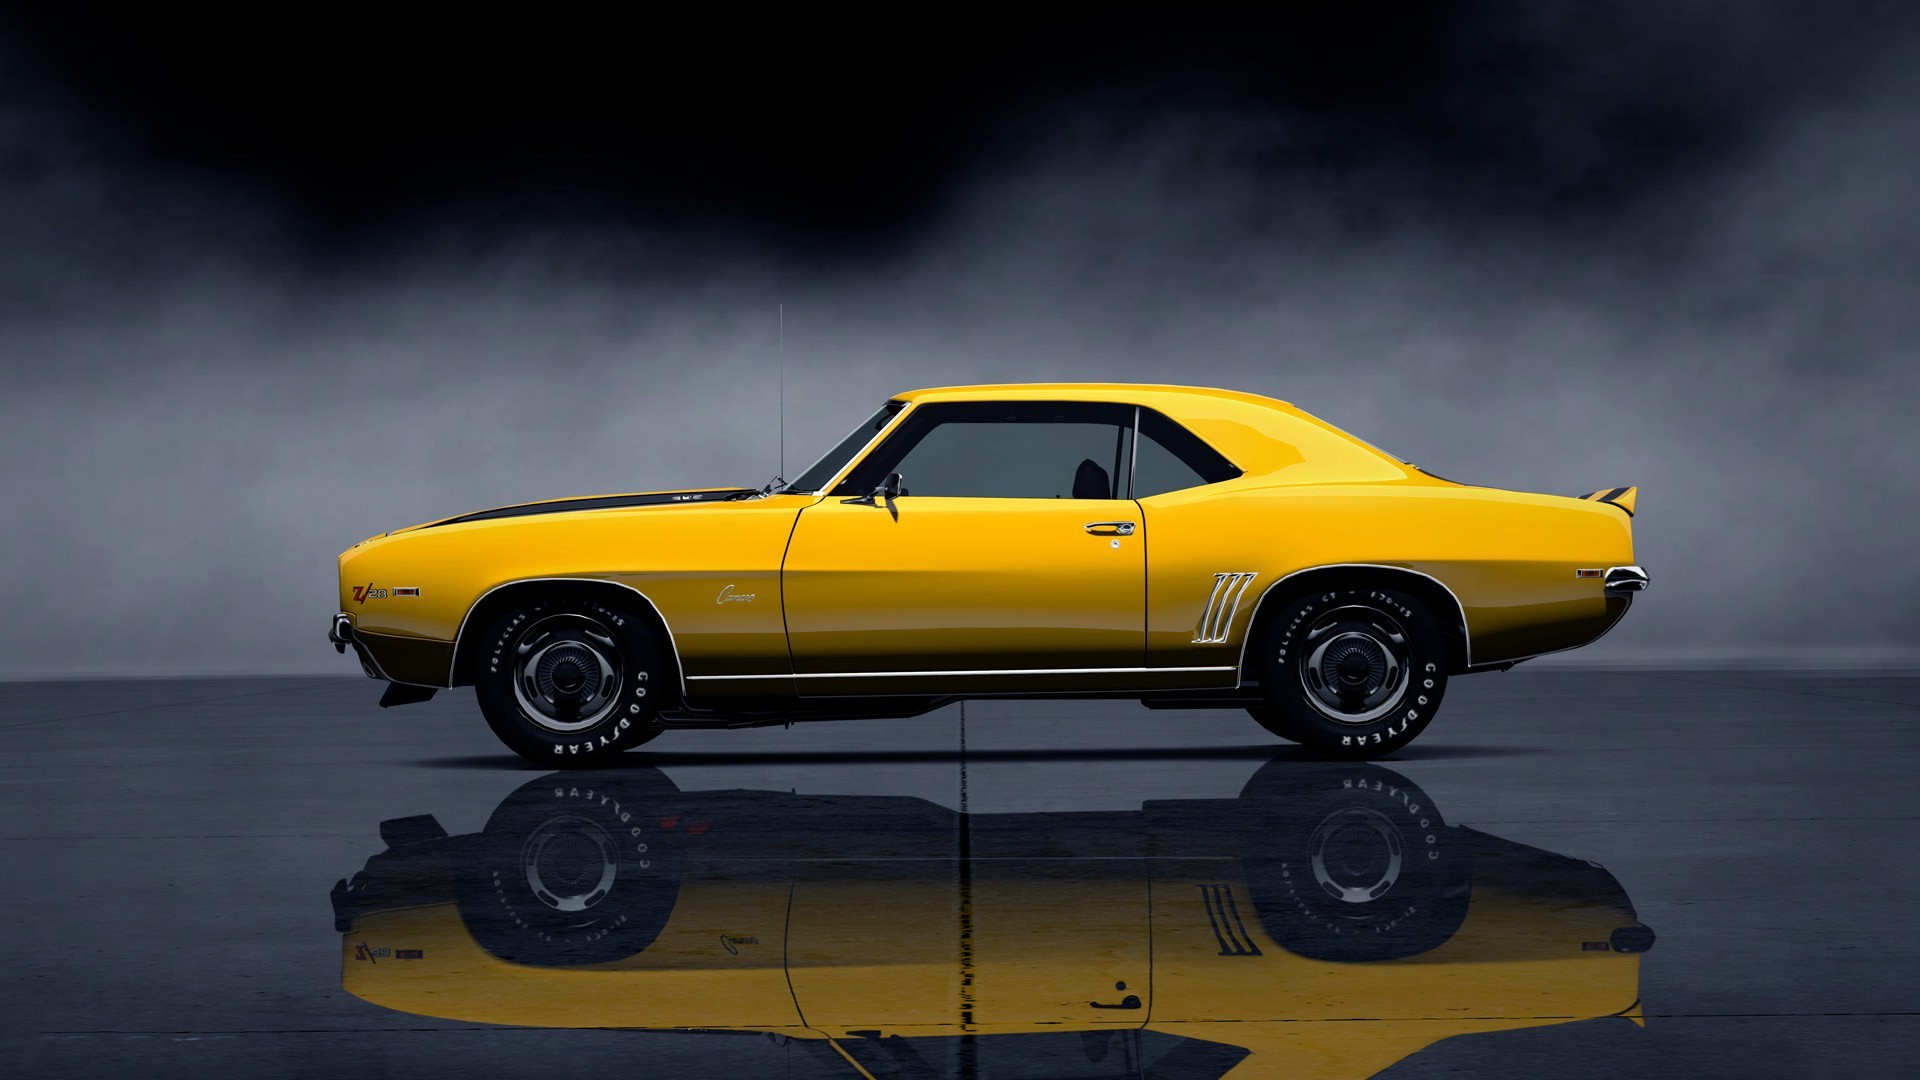 Chevy car racing camro hd wallpaper download chevy car images free